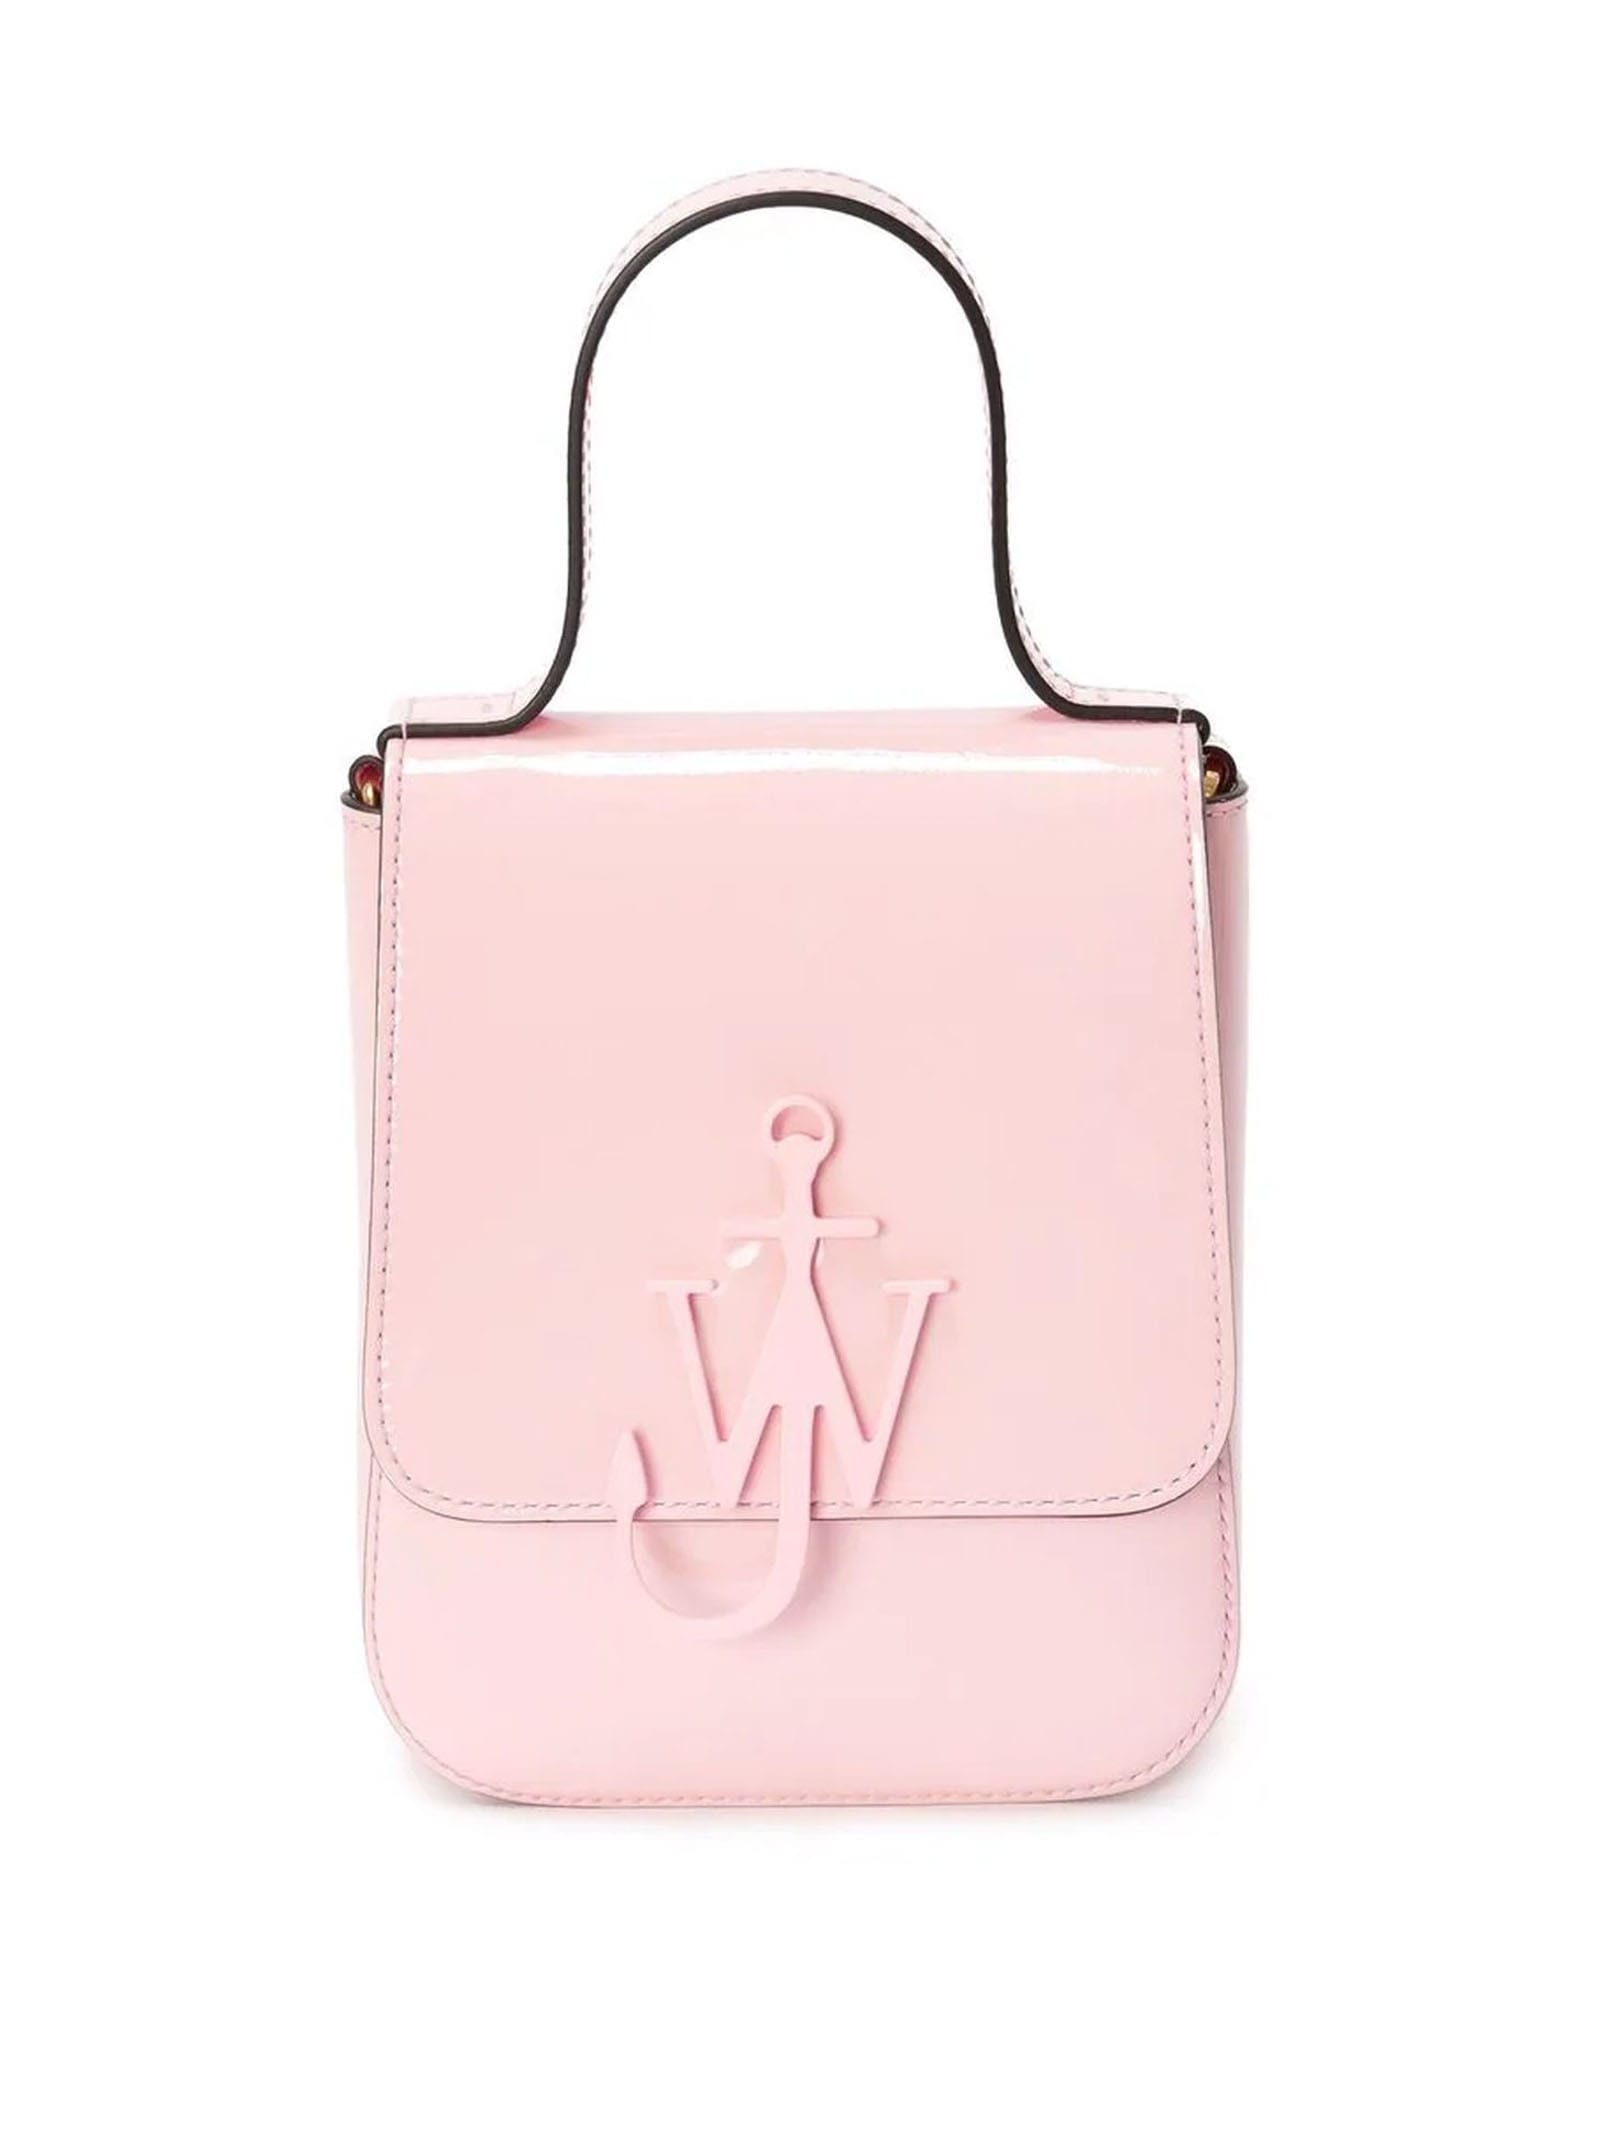 J.W. Anderson Pink Leather Anchor Bag